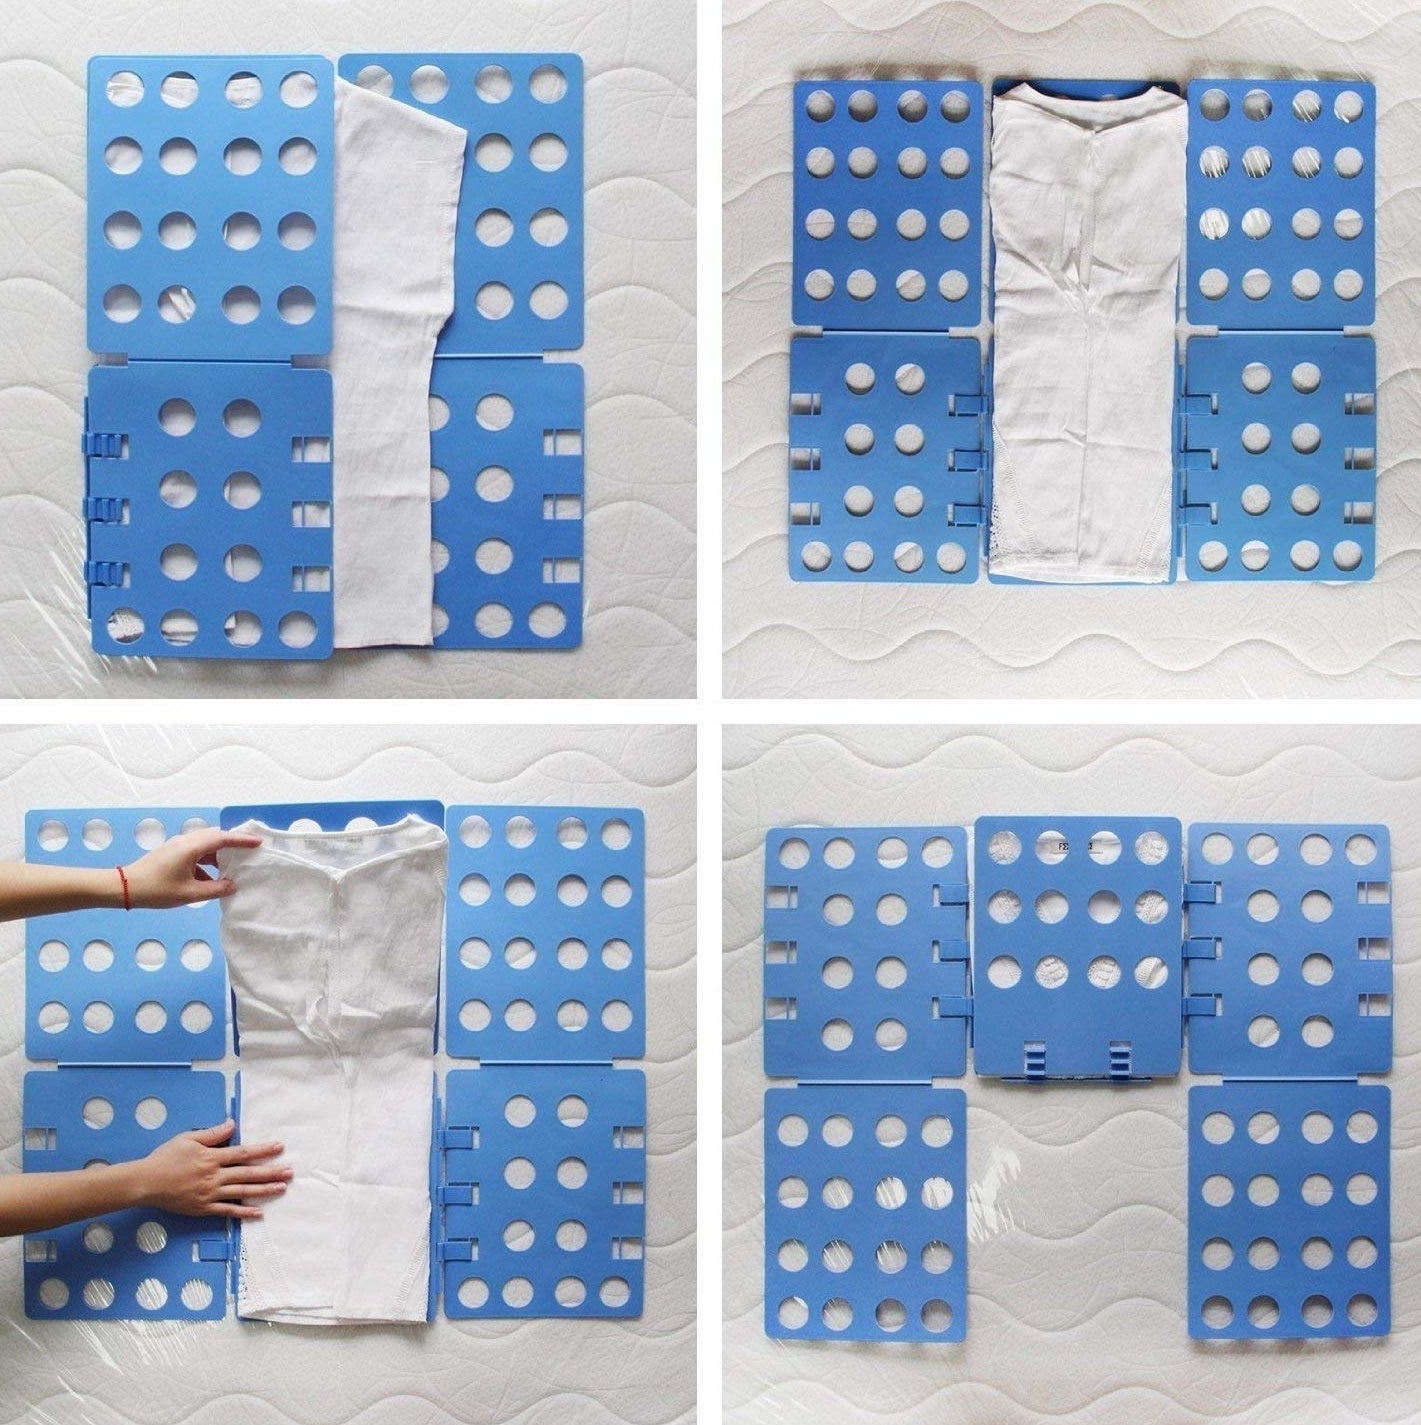 a white shirt being folded on a blue folder